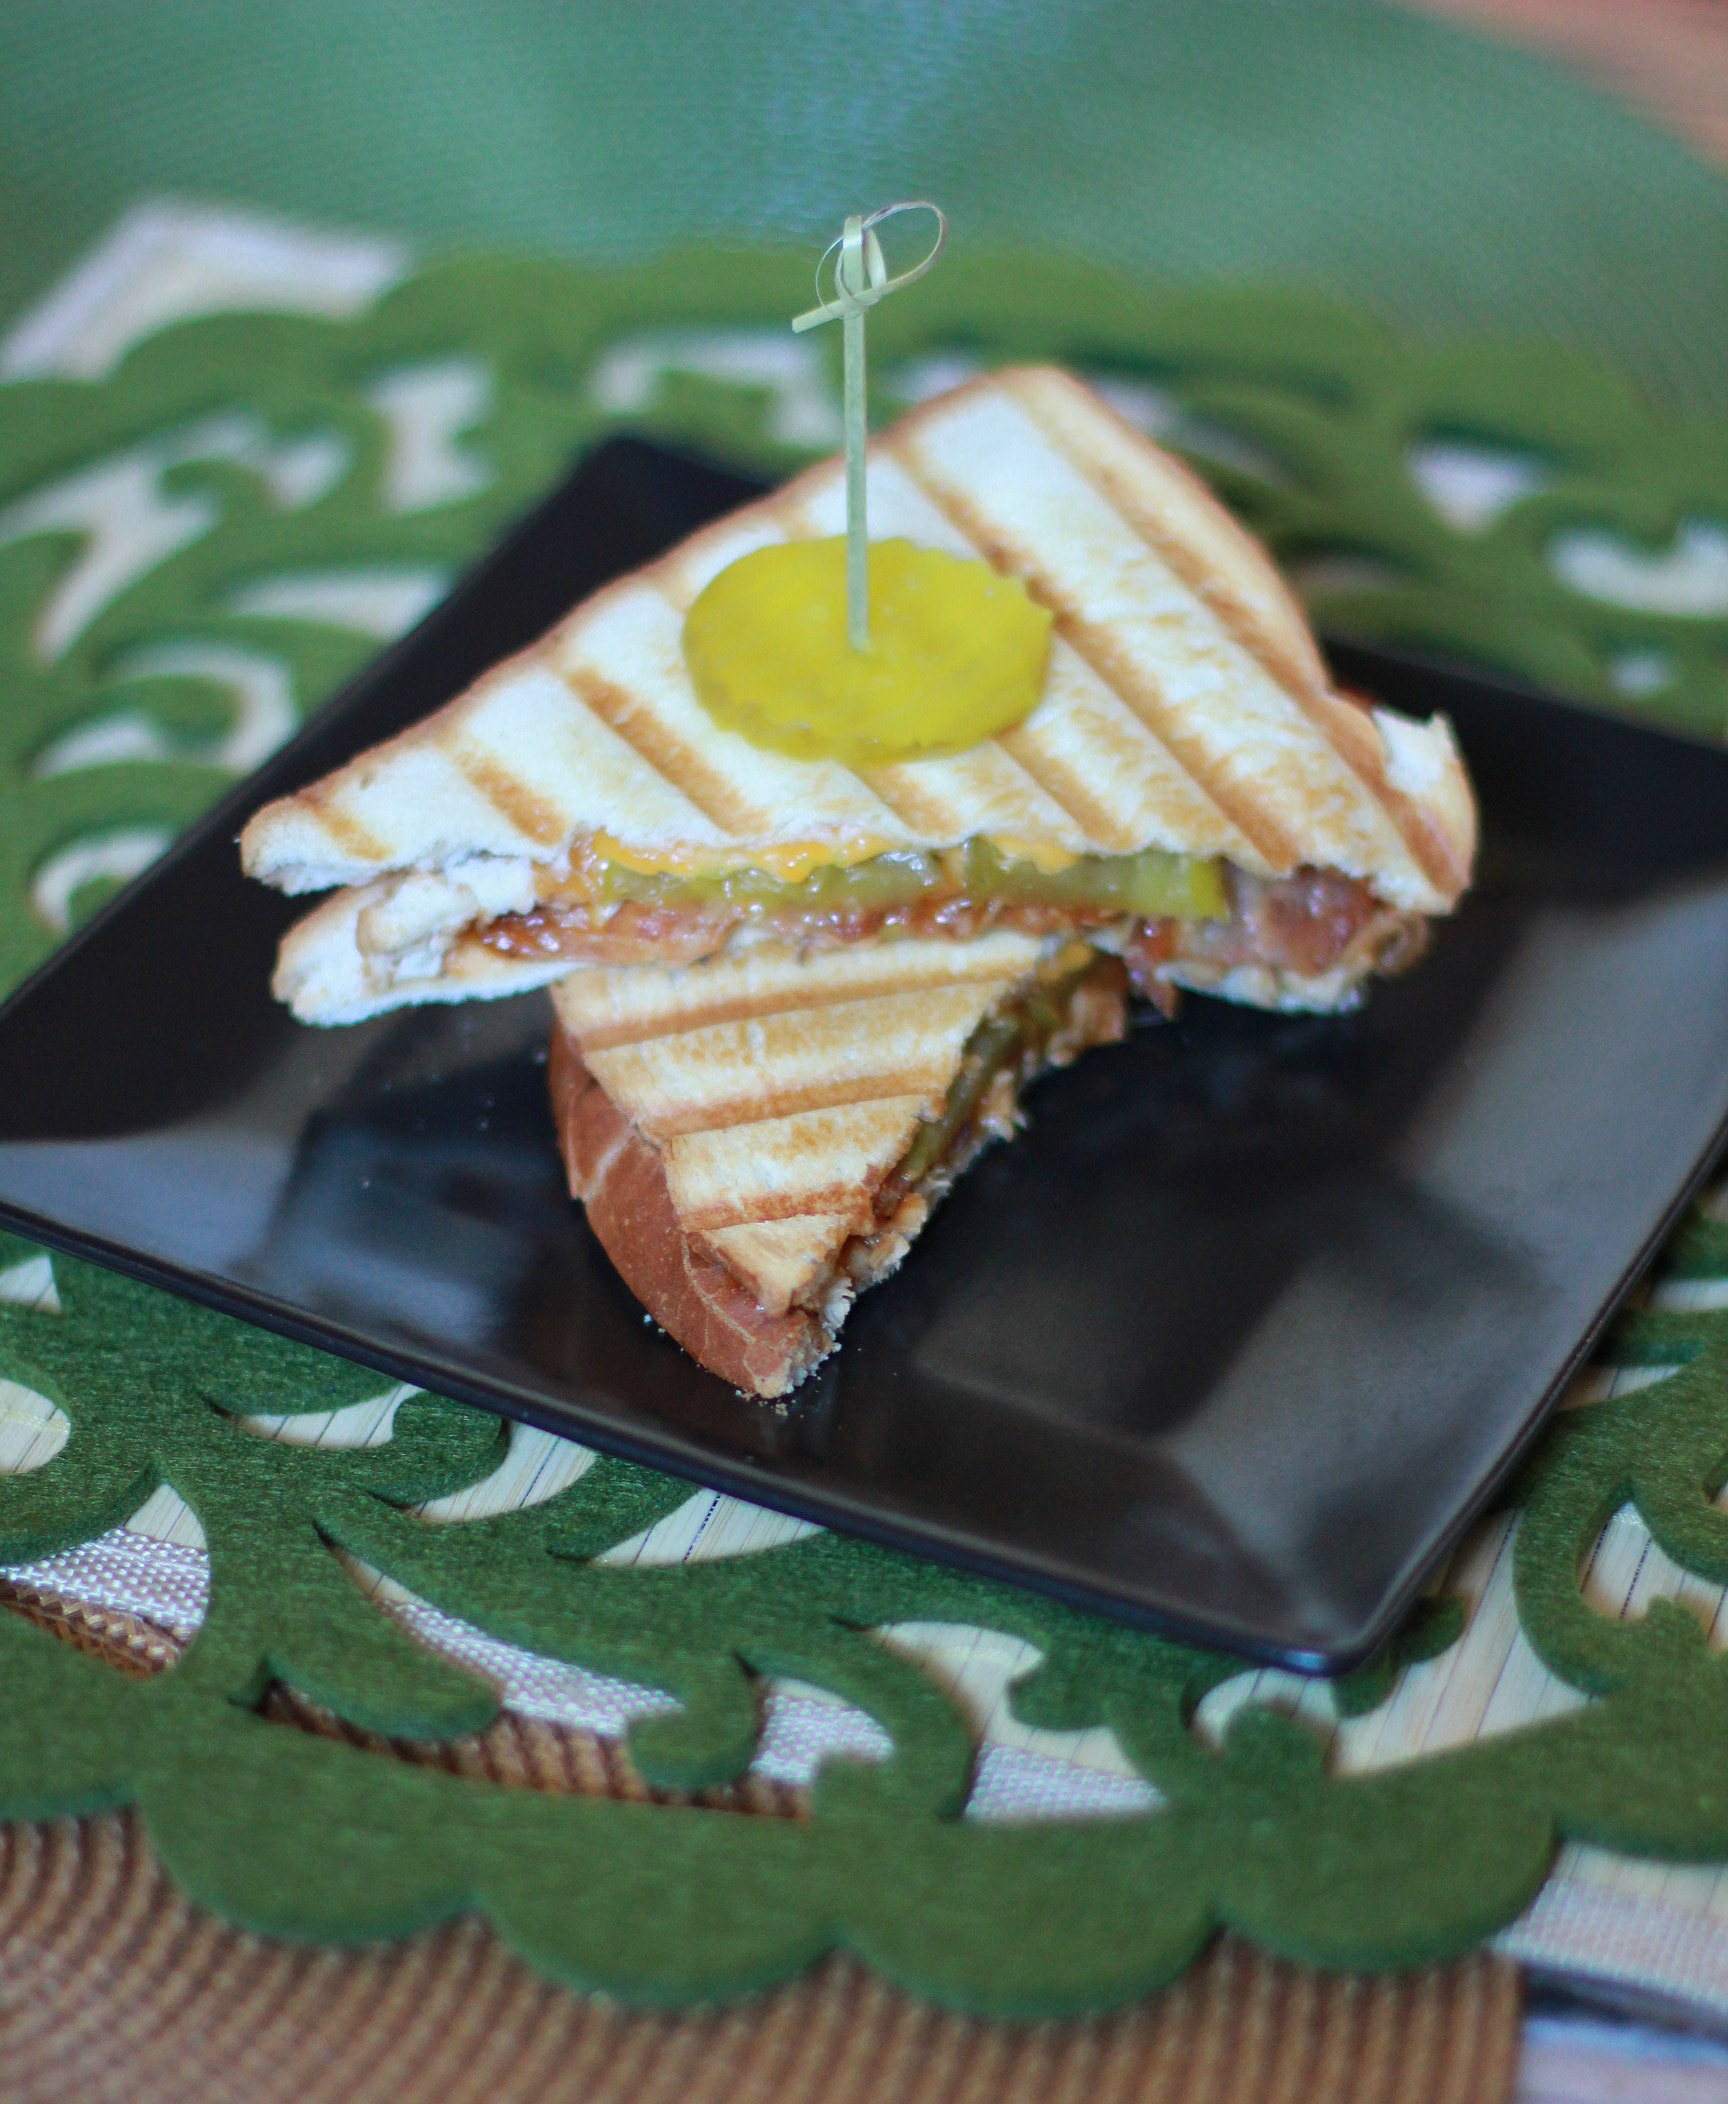 Got some Thanksgiving leftovers you need to use up? Try this Leftover BBQ Turkey Bacon and Cheddar Cheese Panini using leftover turkey!